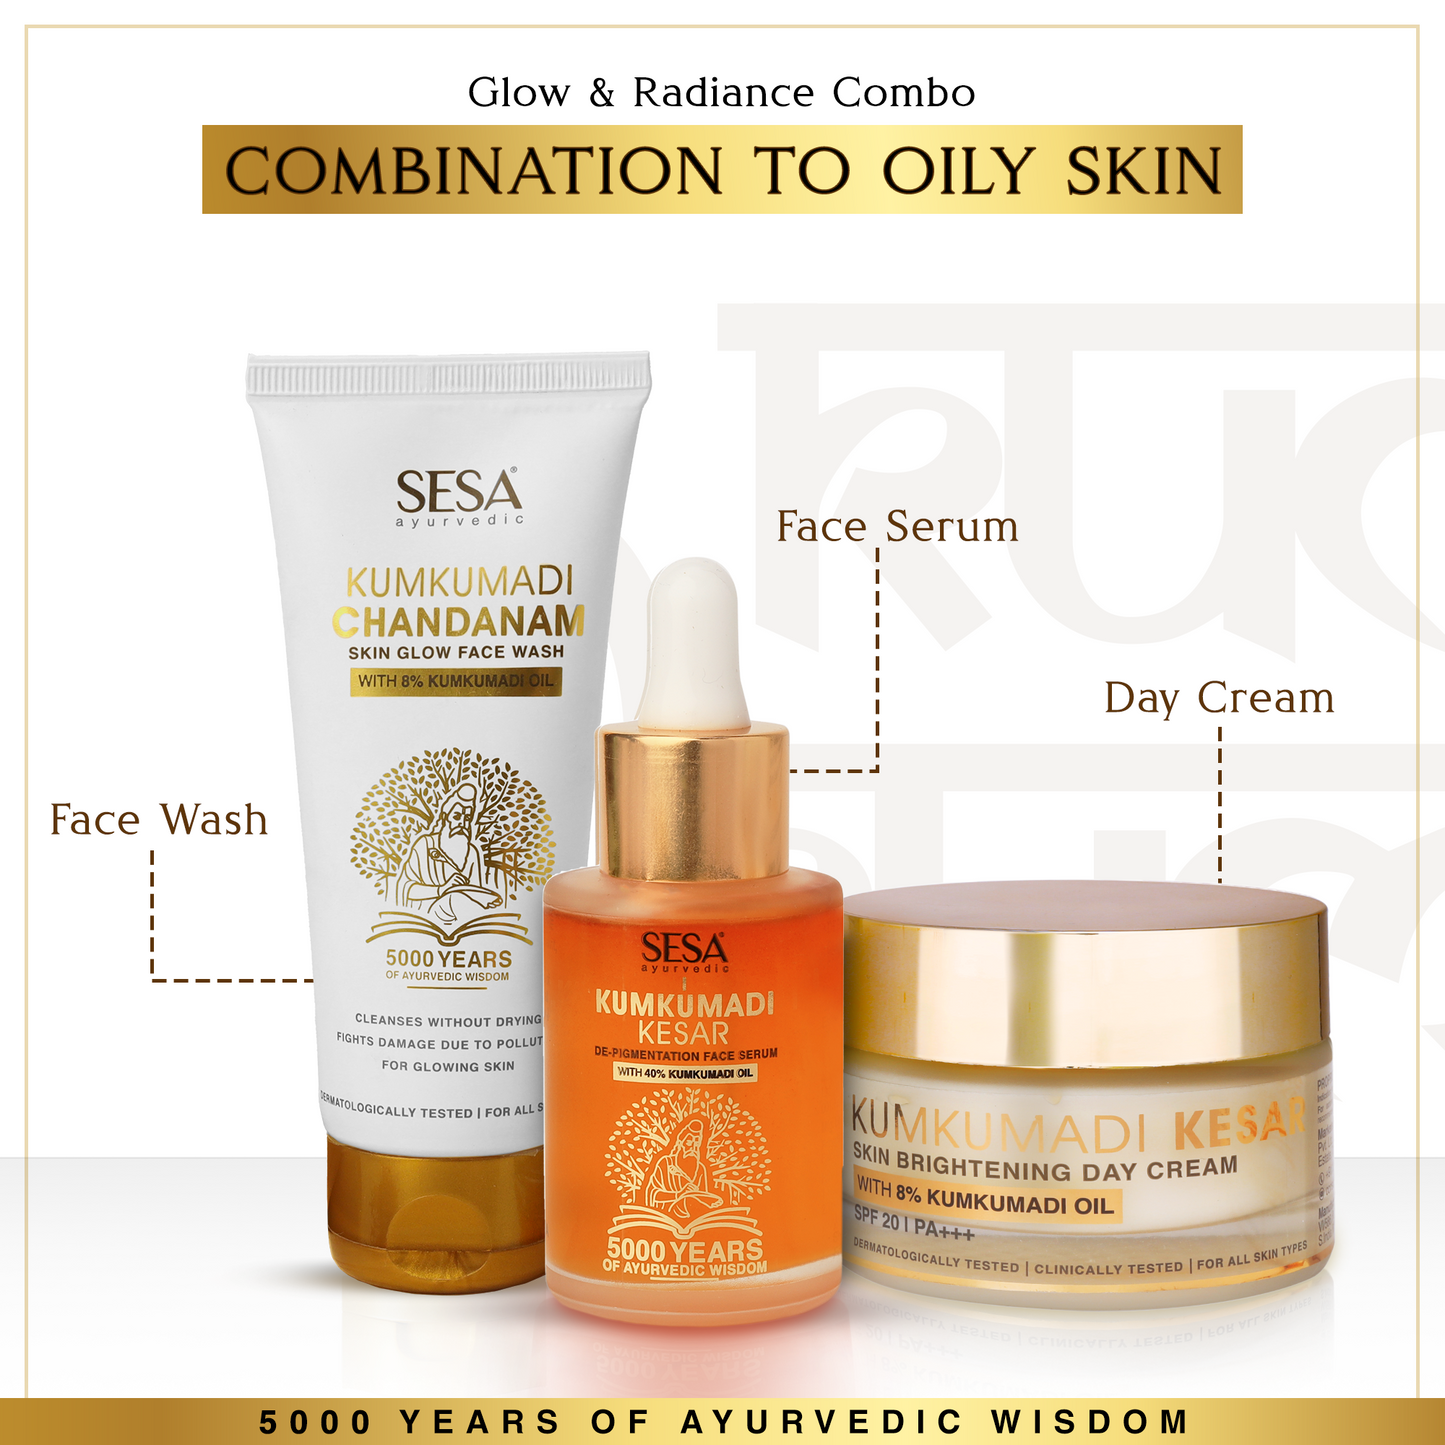 Glow & Radiance Combo - For Combination to Oily Skin